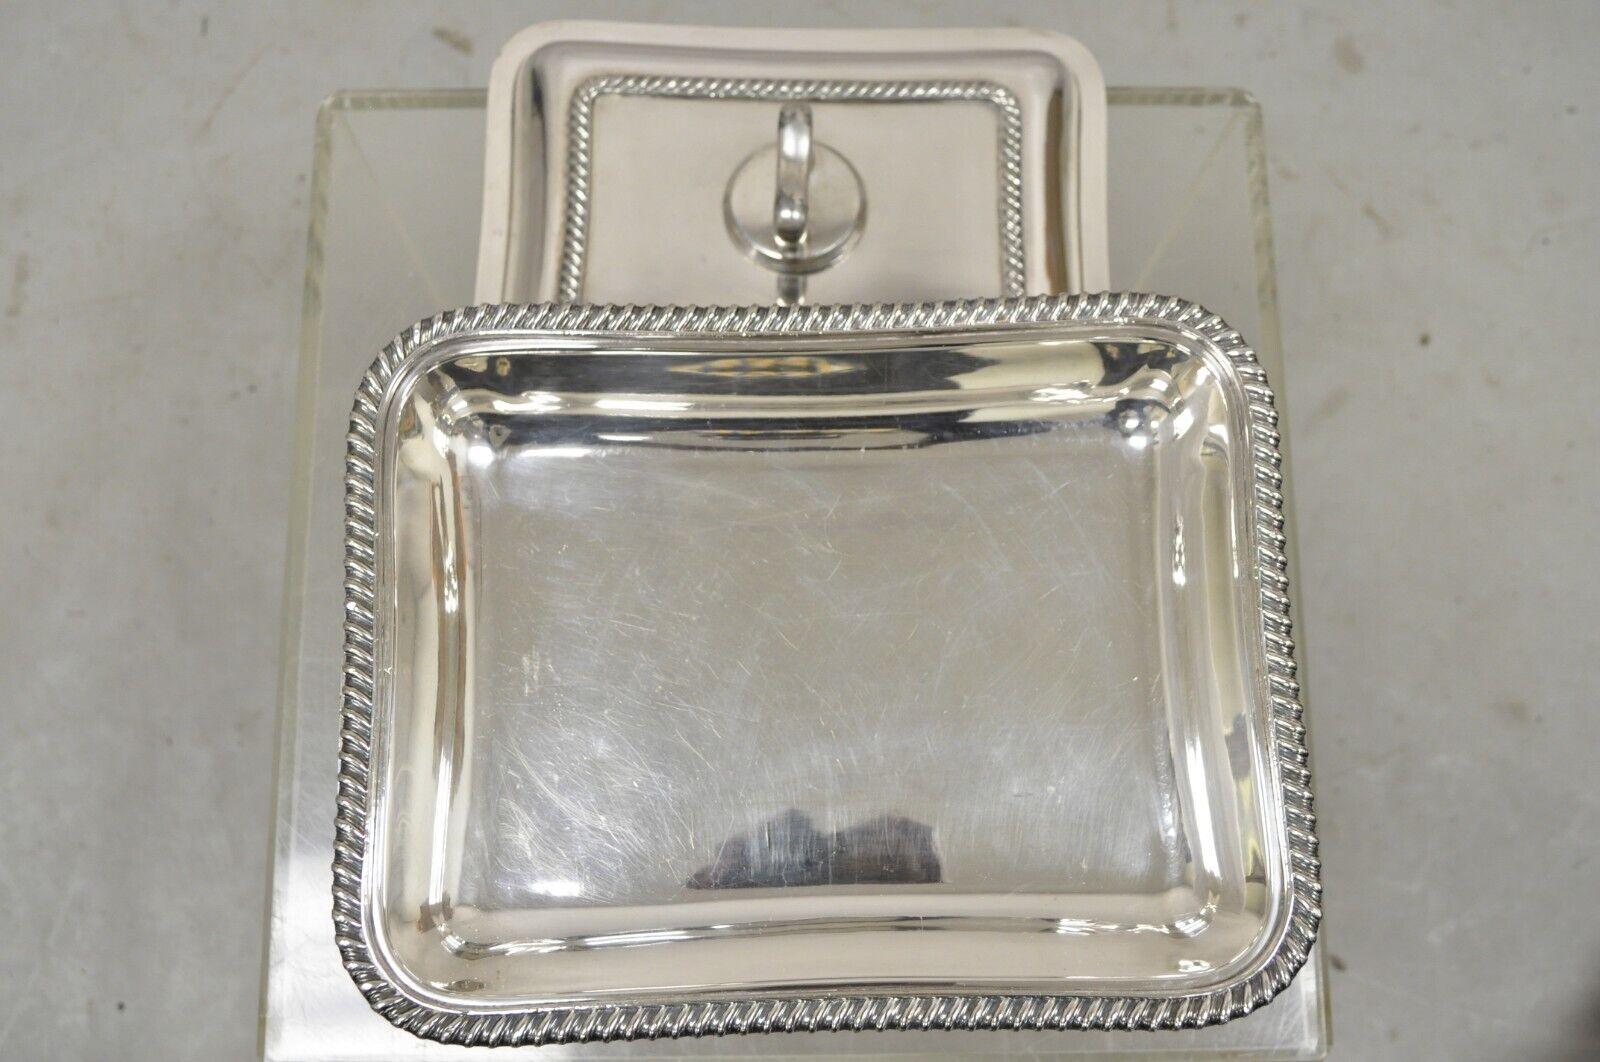 20th Century Antique Walker & Hall Silver Plated Chafing Serving Dish Warmer with Lions